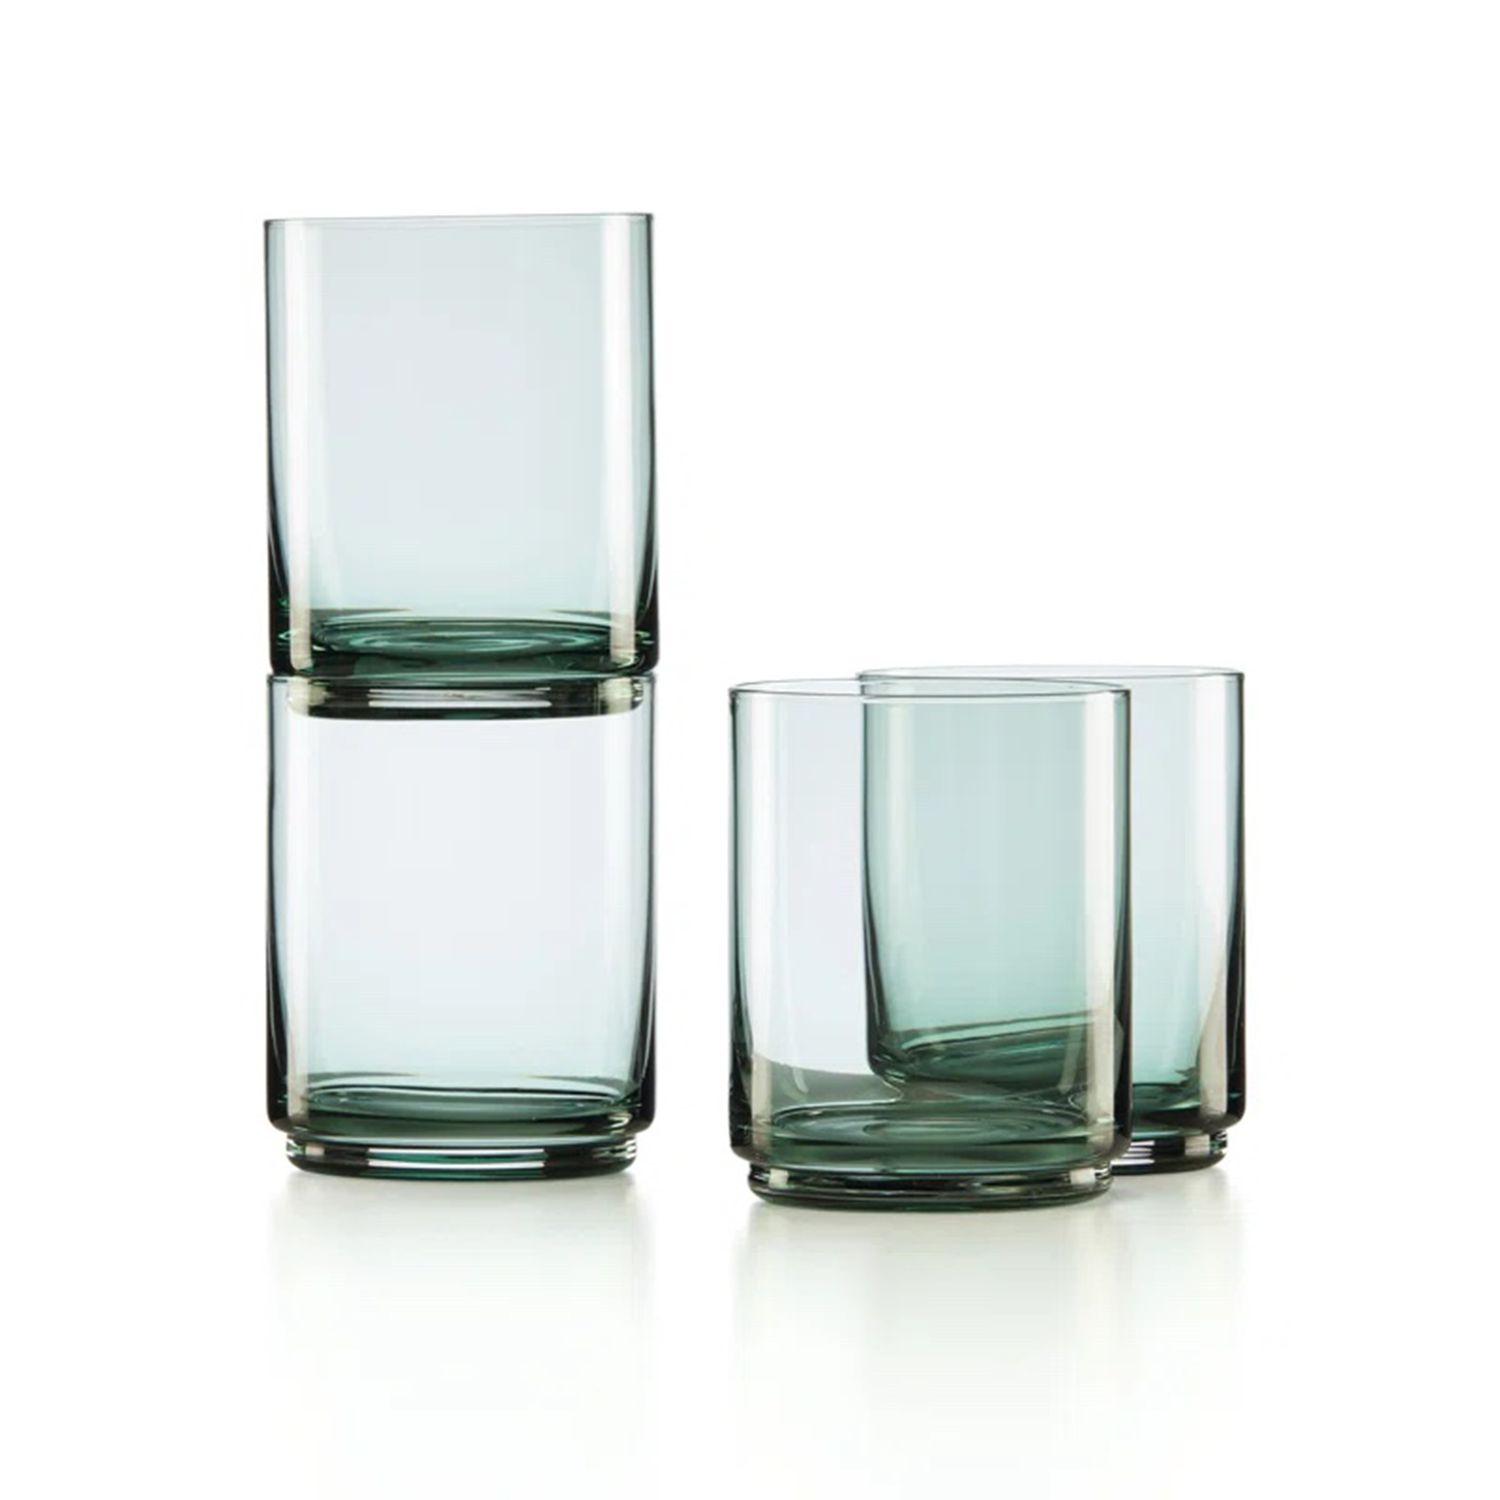 Lenox Tuscany Classics Tall Glasses in Forest Green